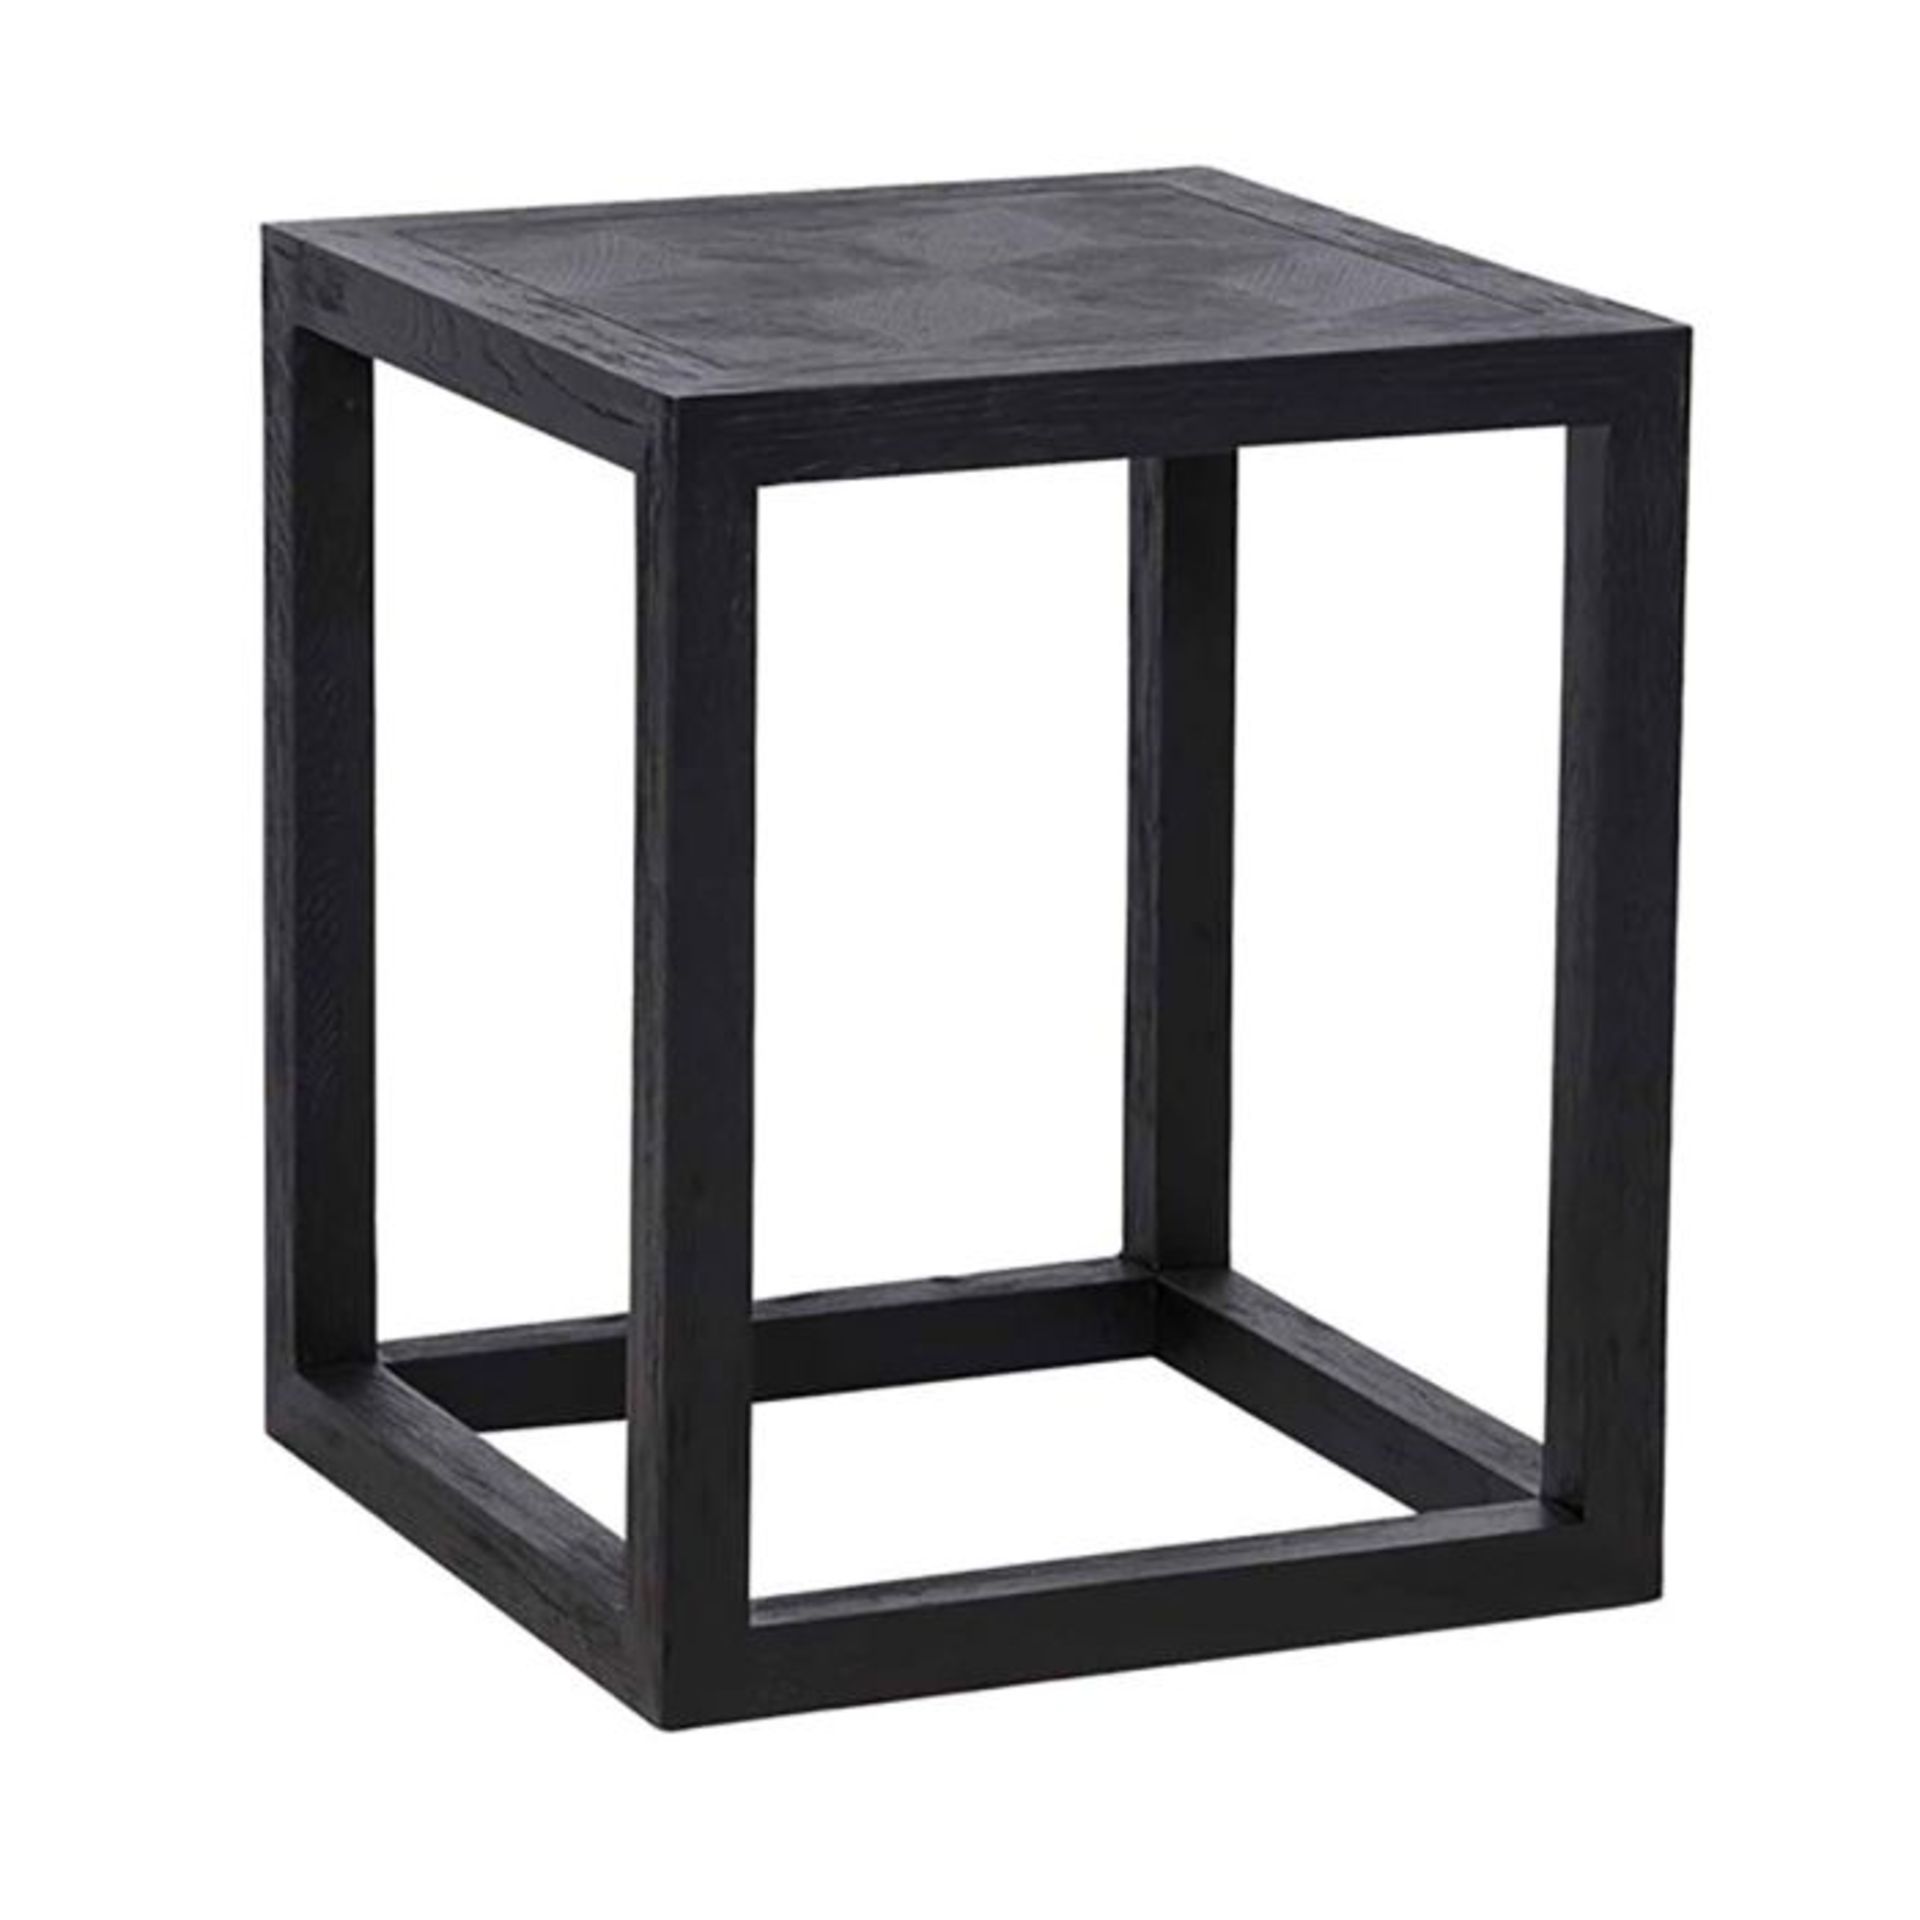 Moot Group Richmond Blax Black Side Table RRP ?586.00 The Richmond Blax Black Side Table is a lovely - Image 4 of 6